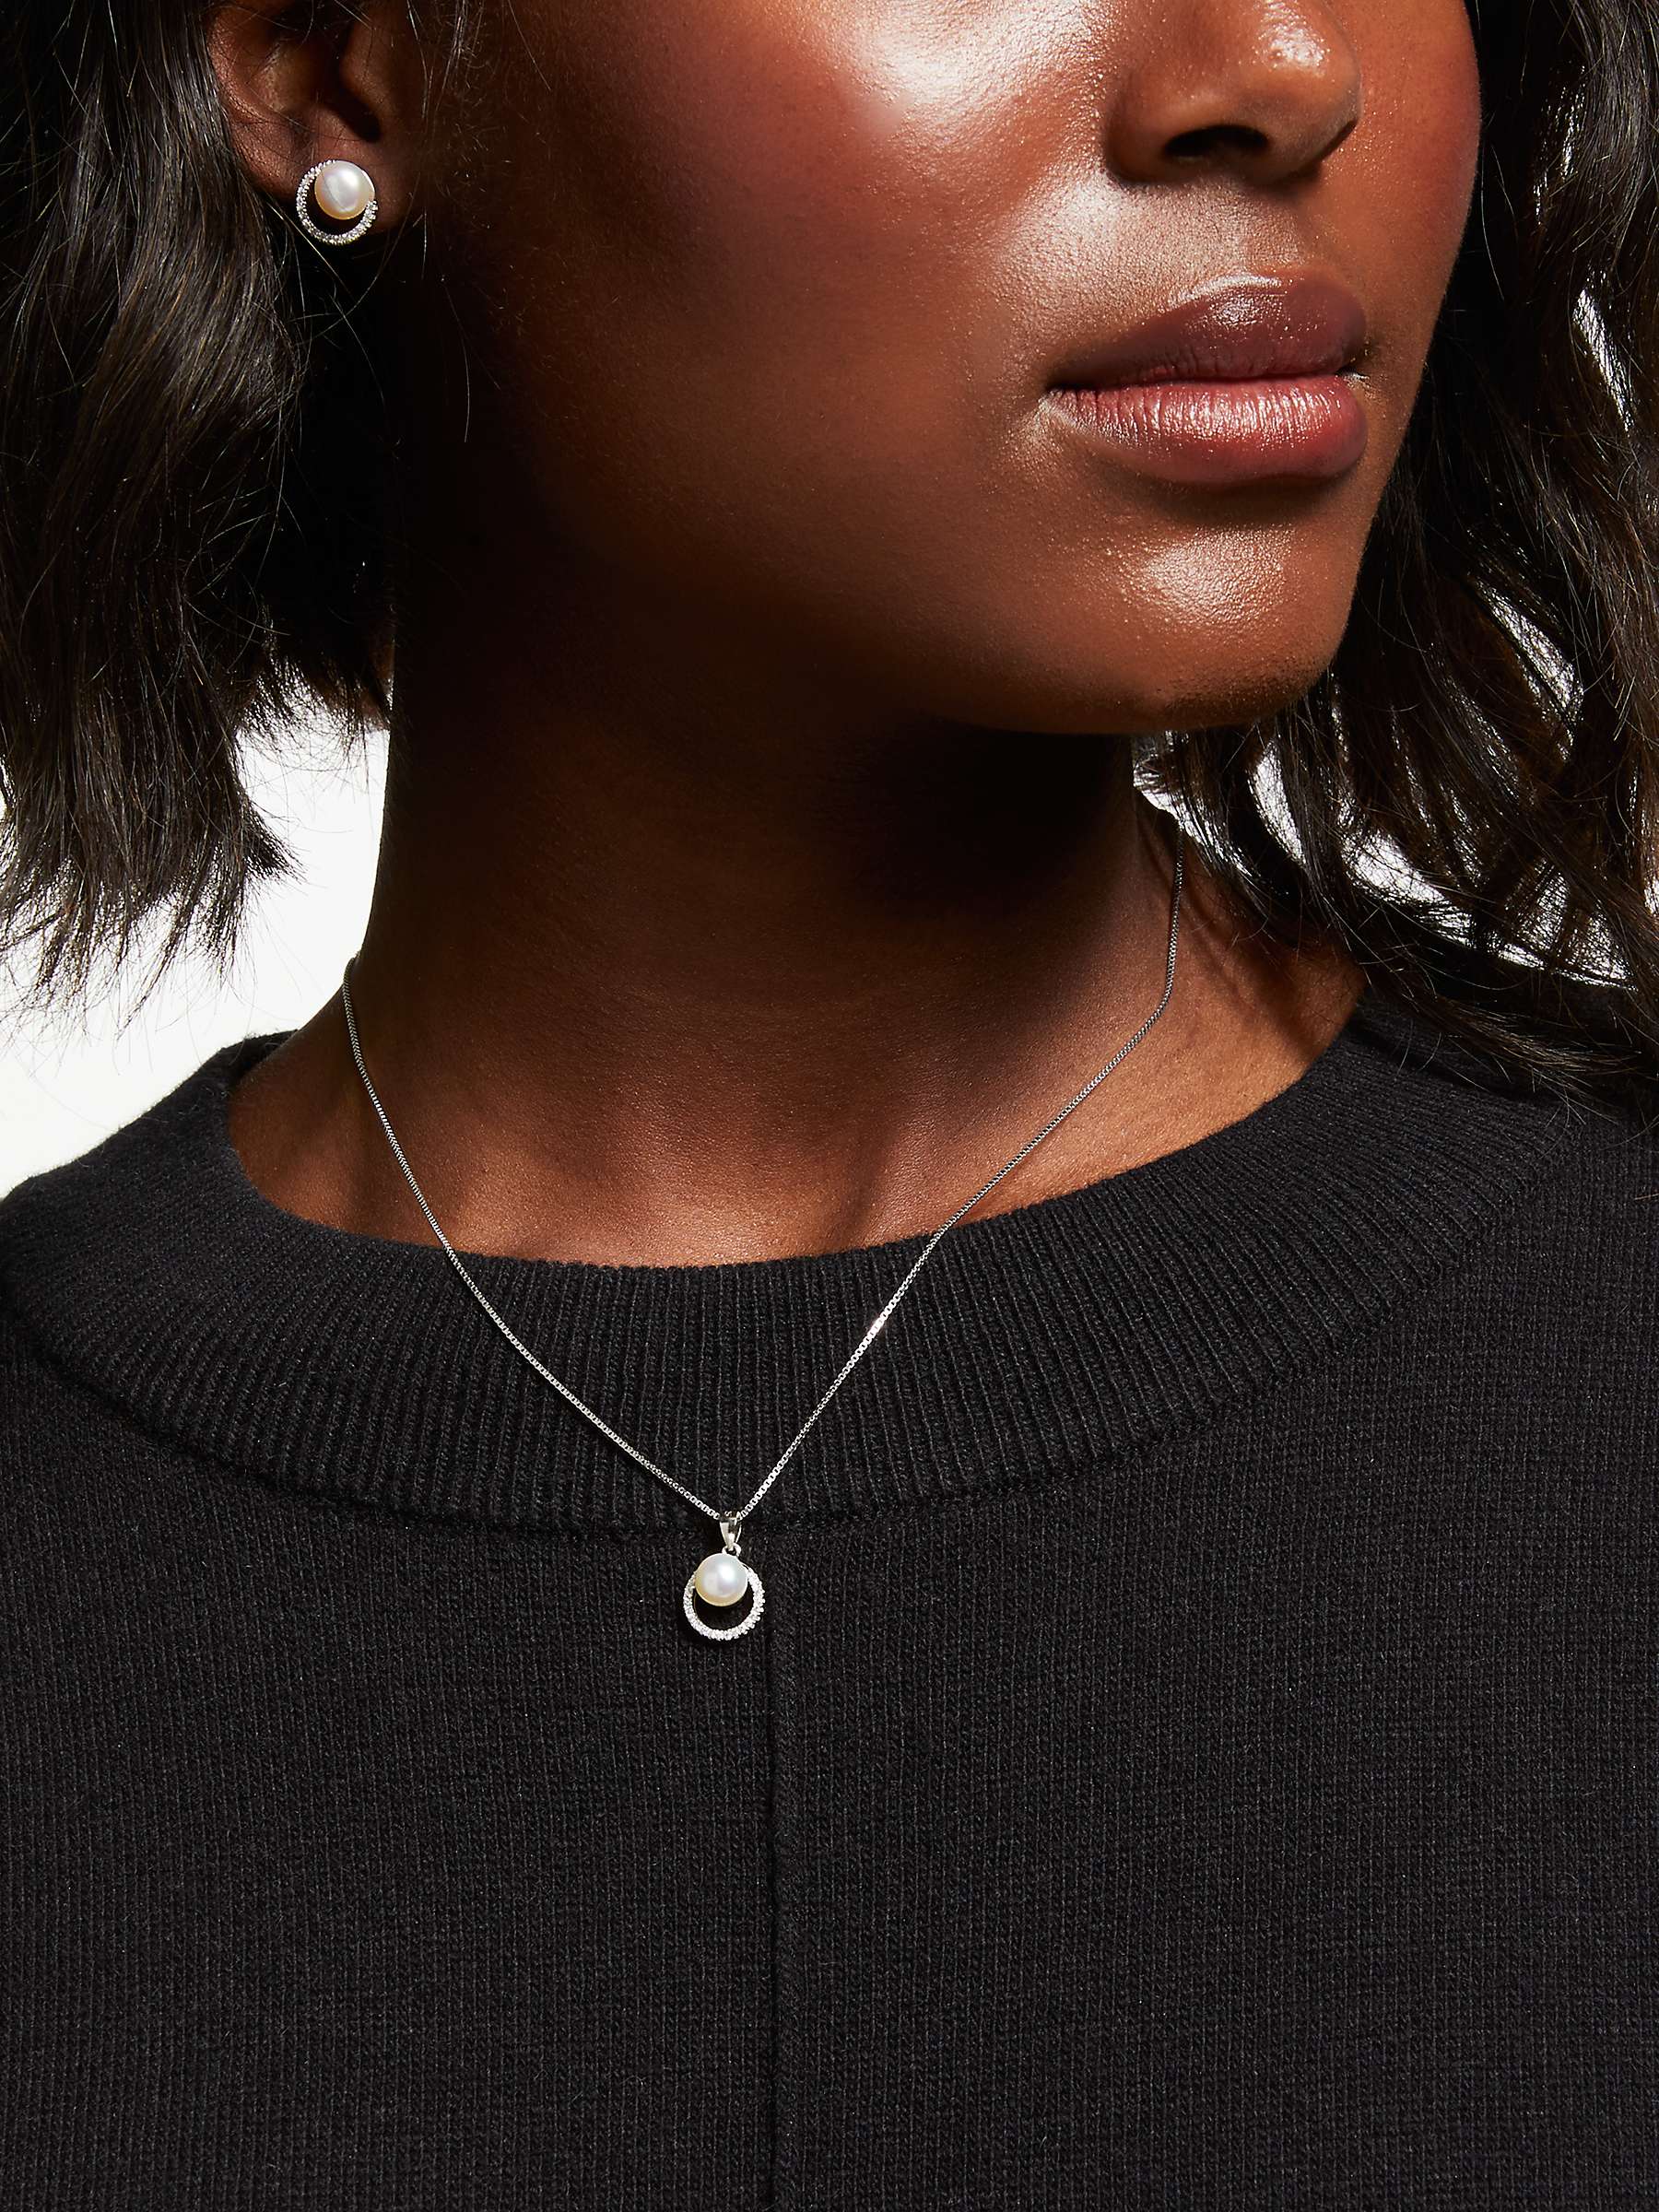 Buy Lido Crystal and Freshwater Pearl Round Stud Earrings and Pendant Necklace Jewellery Set, Silver Online at johnlewis.com